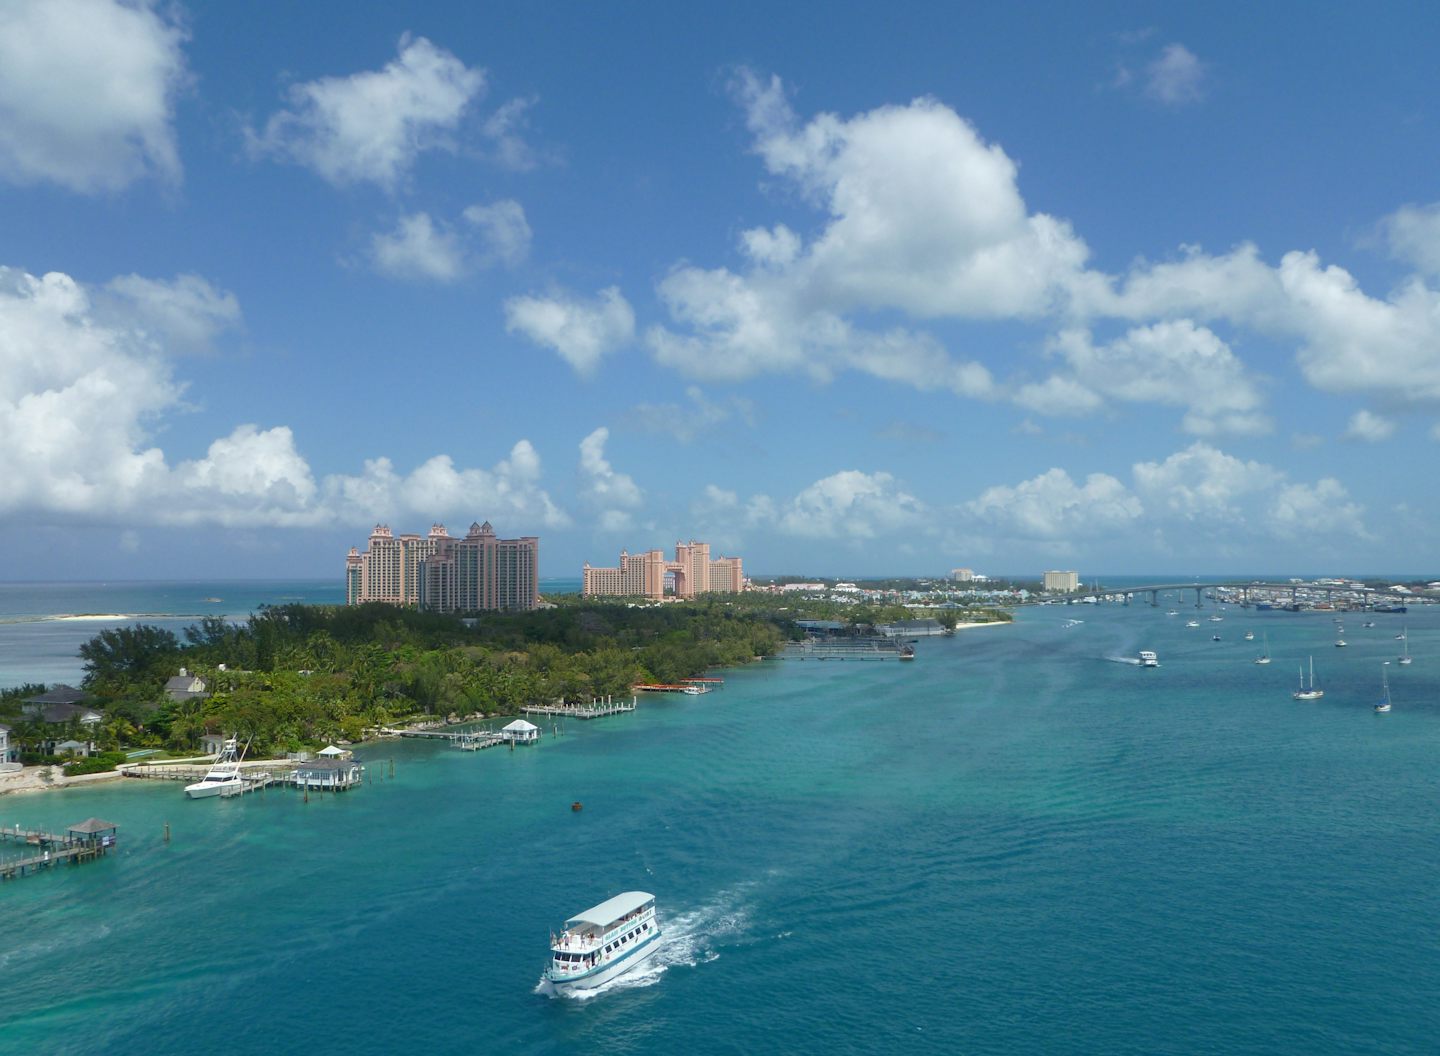 View from the ship of Atlantis in Nassau, Bahamas